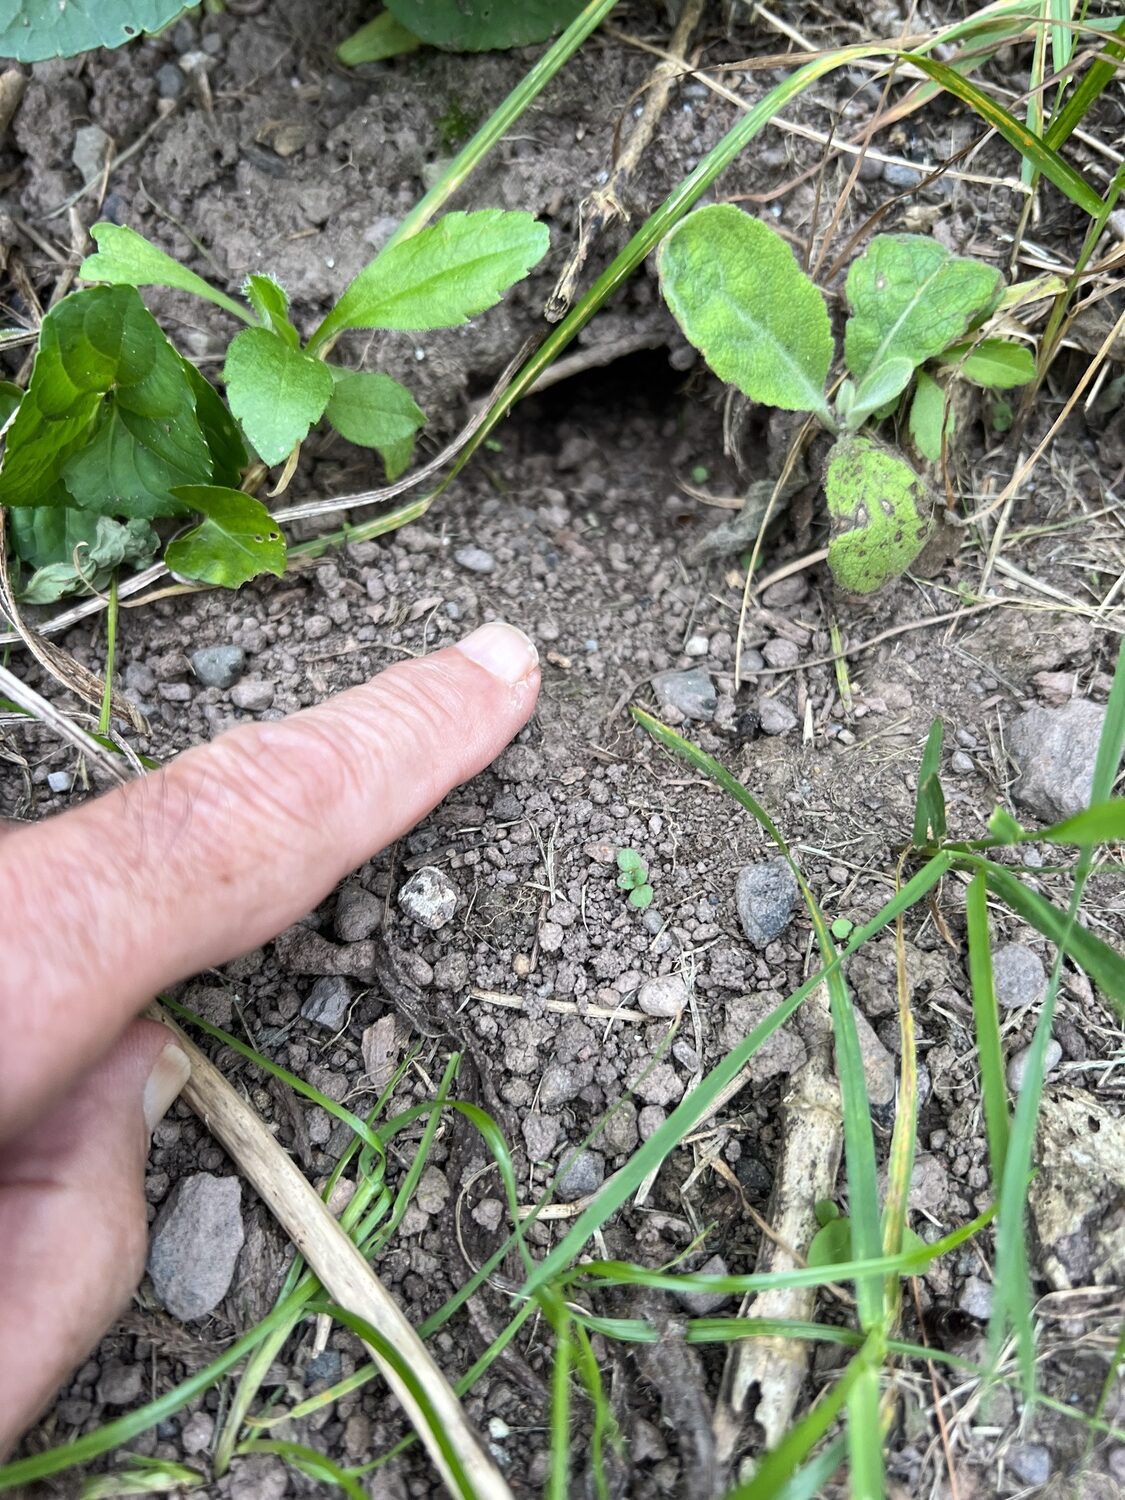 Four steps to catching voles. Step 1: Locate the home base.  It’s usually a 2-inch diameter hole at the base of a fruit tree or where lupines, poppies or other fleshy rooted perennials are growing. This was at the base of a perennial hibiscus.
ANDREW MESSINGER